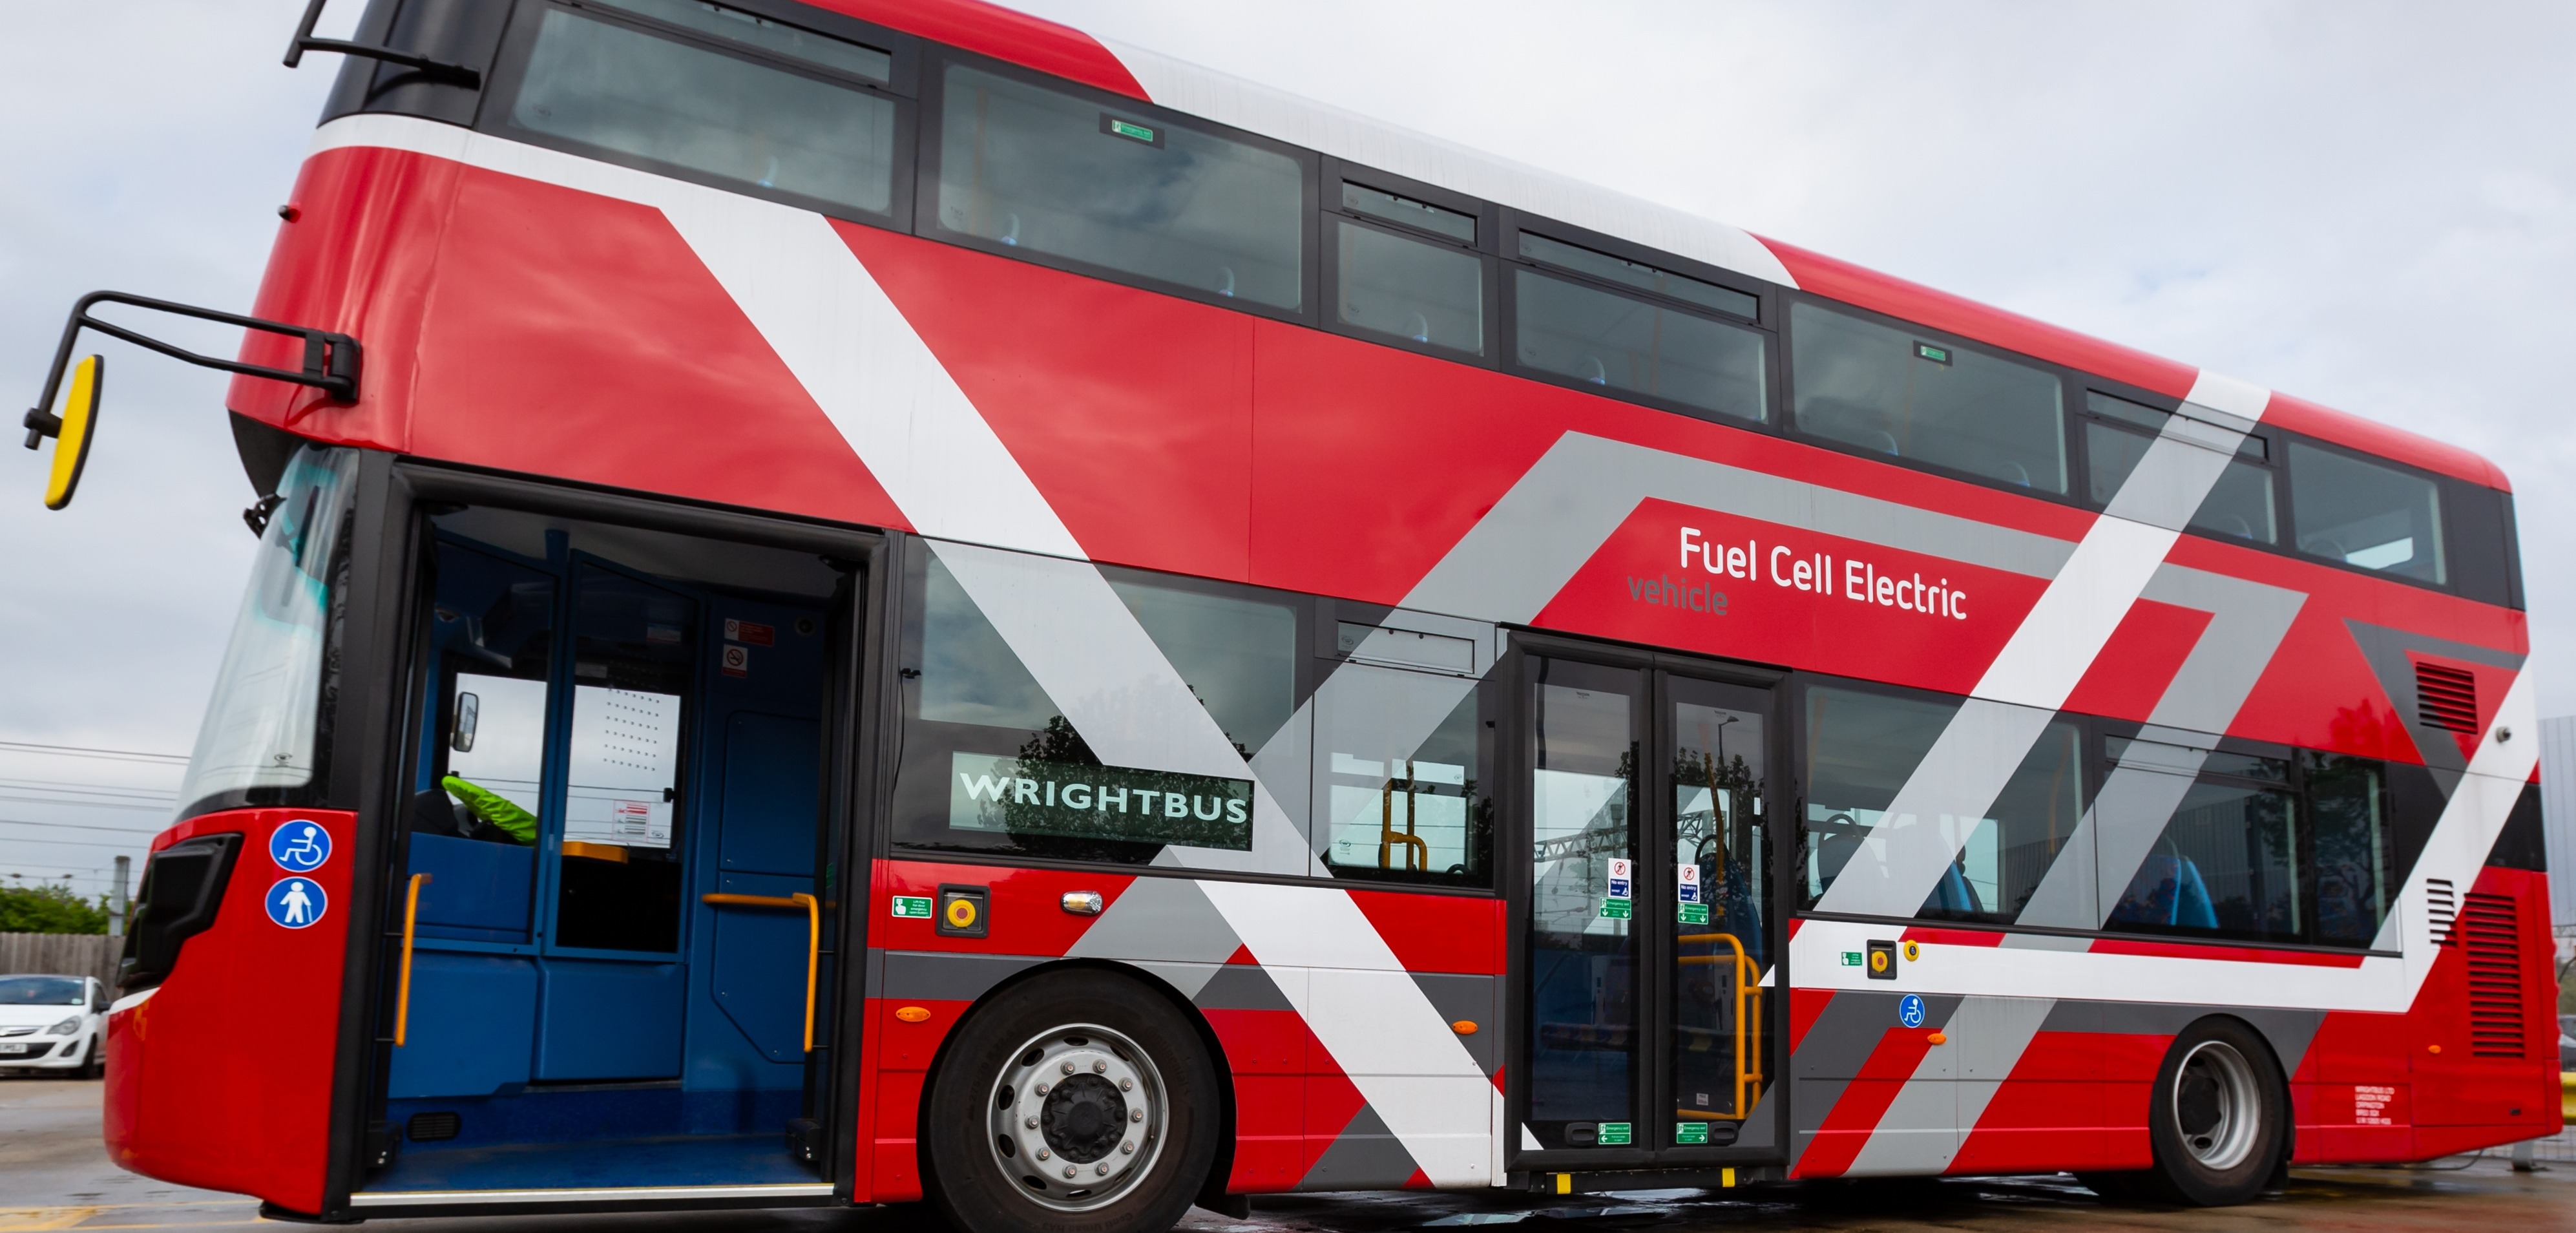 World’s first hydrogen double decker buses set for London - Electric ...